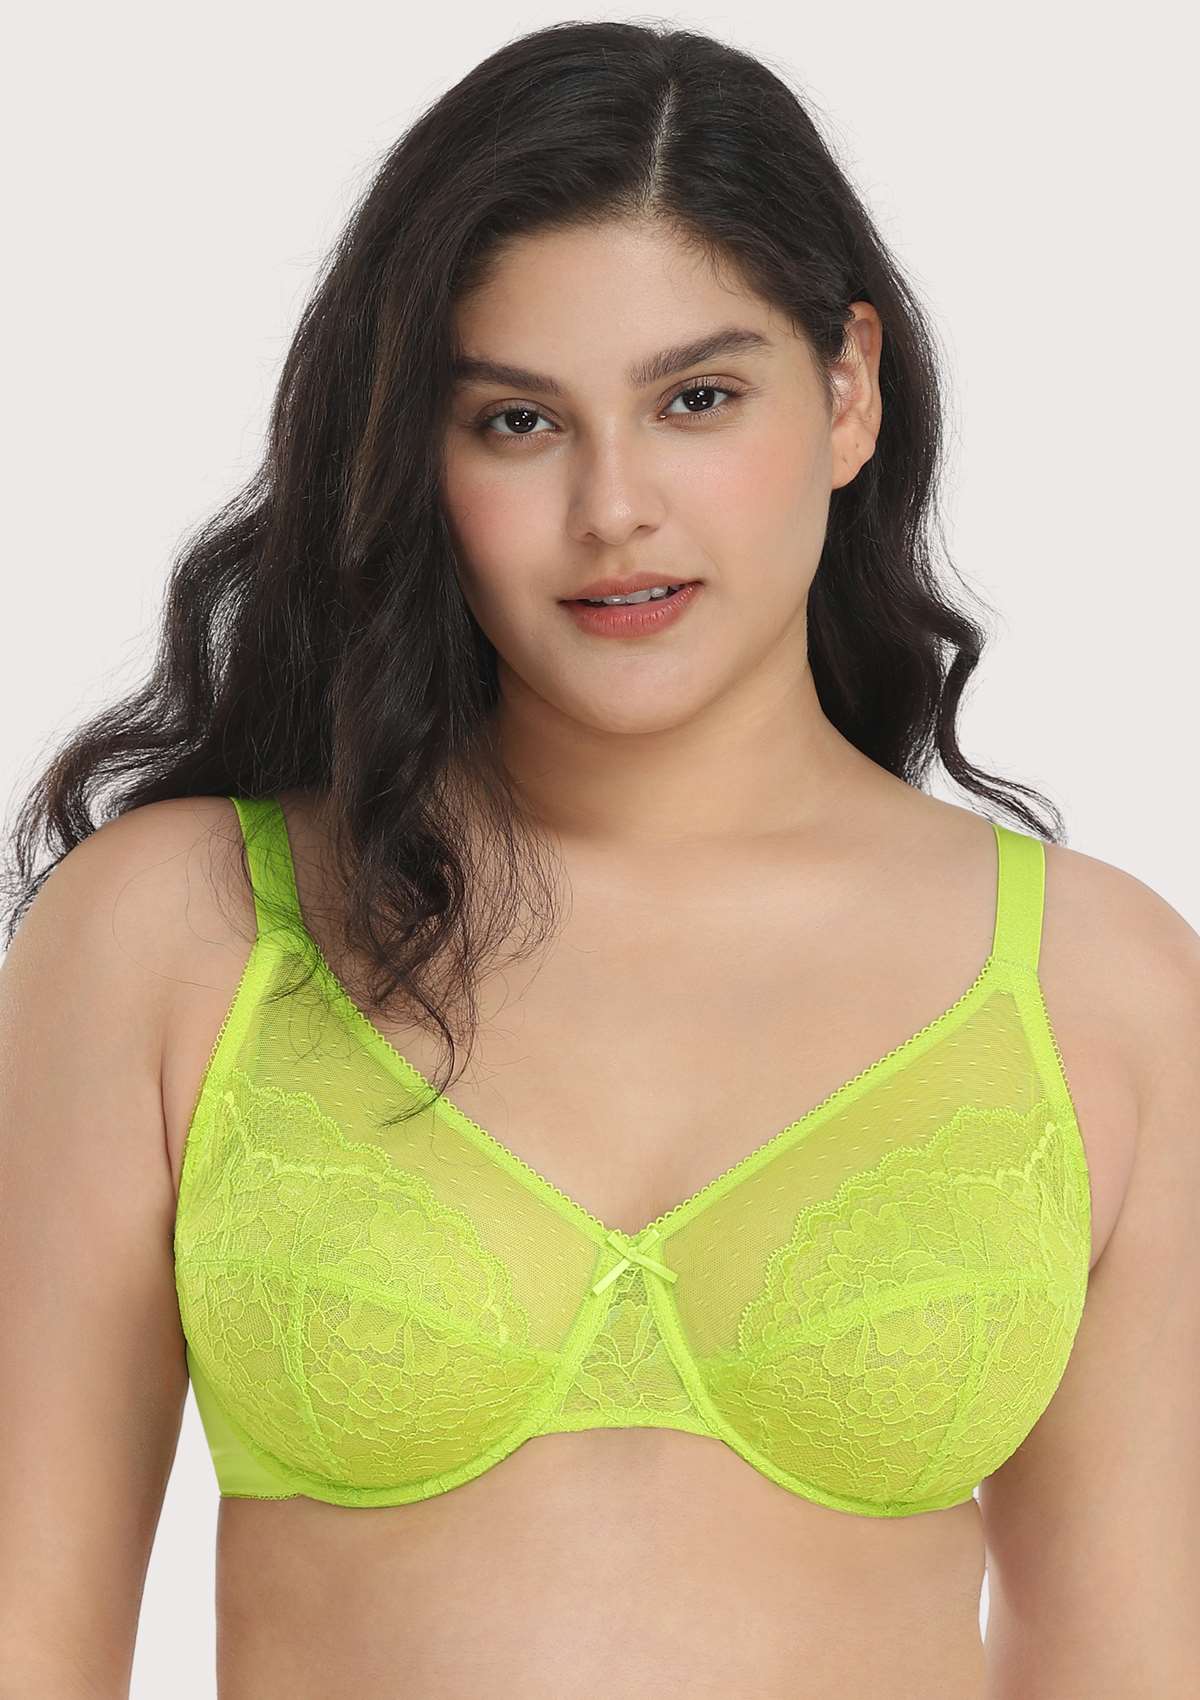 HSIA Enchante Full Cup Minimizing Bra: Supportive Unlined Lace Bra - Lime Green / 38 / G